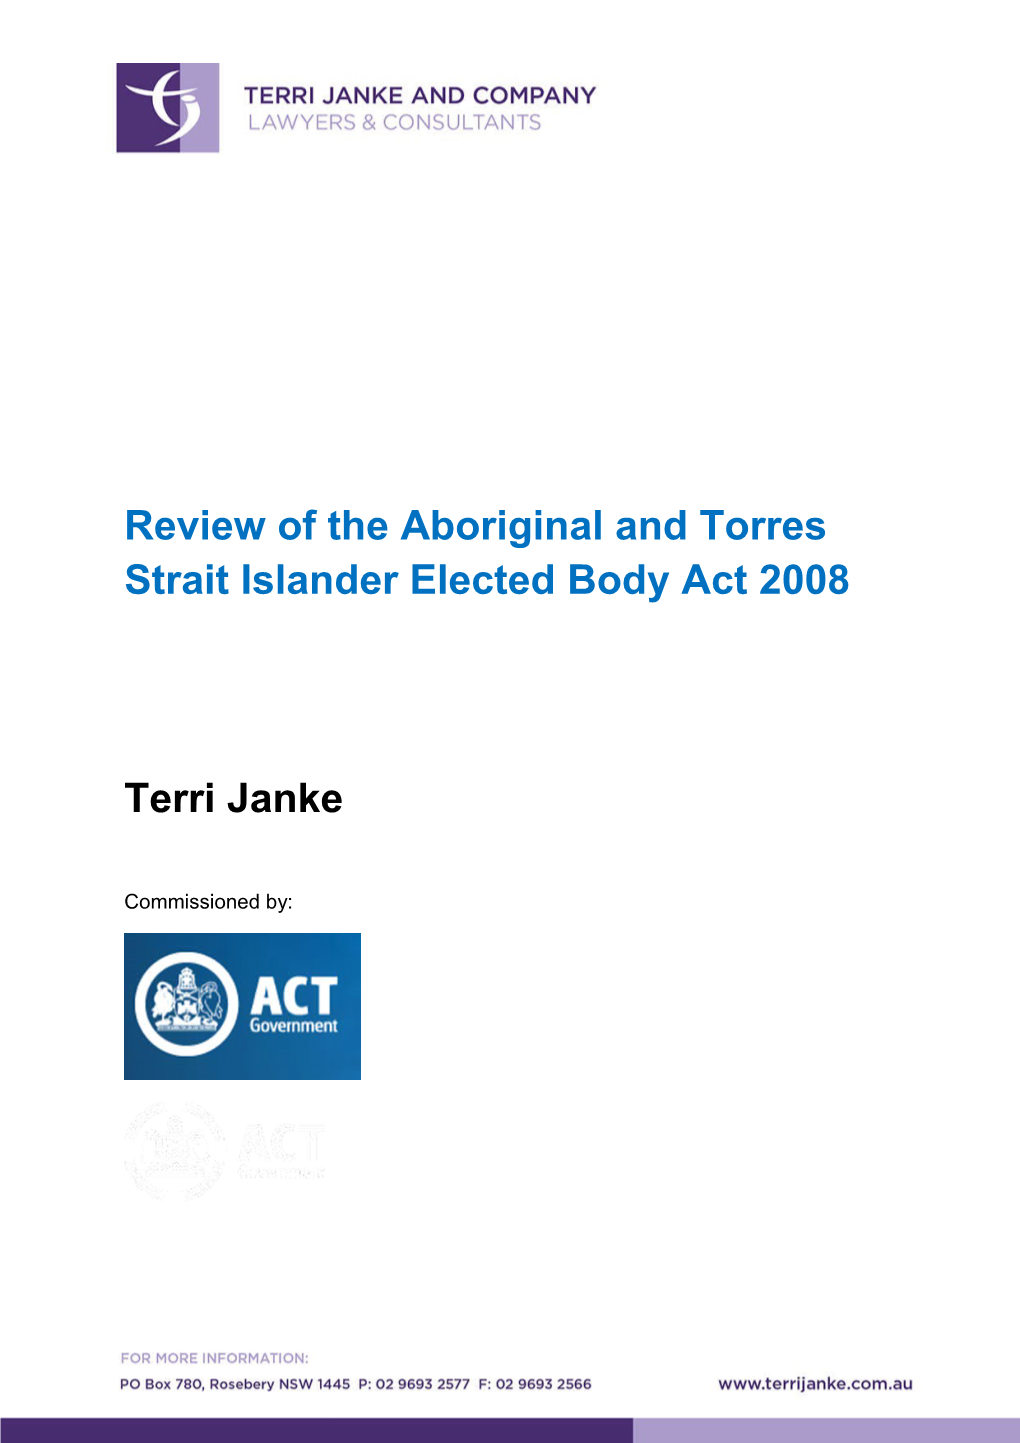 Report on the Review ATSIEB Act